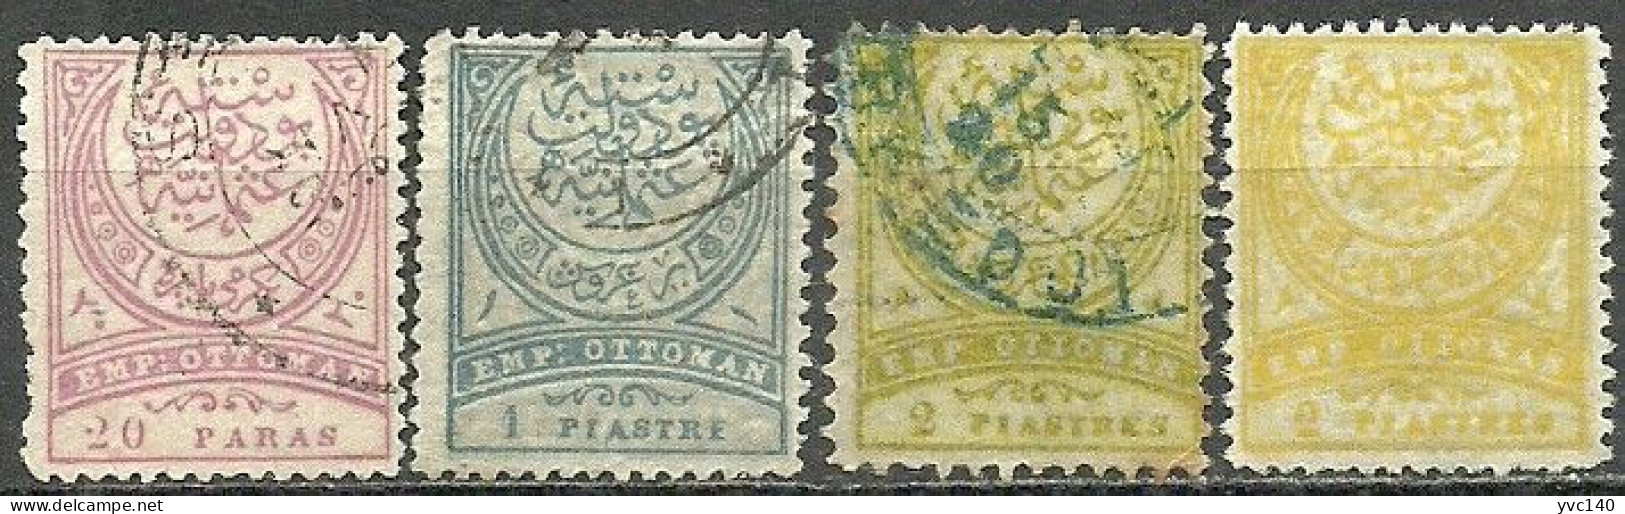 Turkey; 1890 Crescent Postage Stamps - Used Stamps